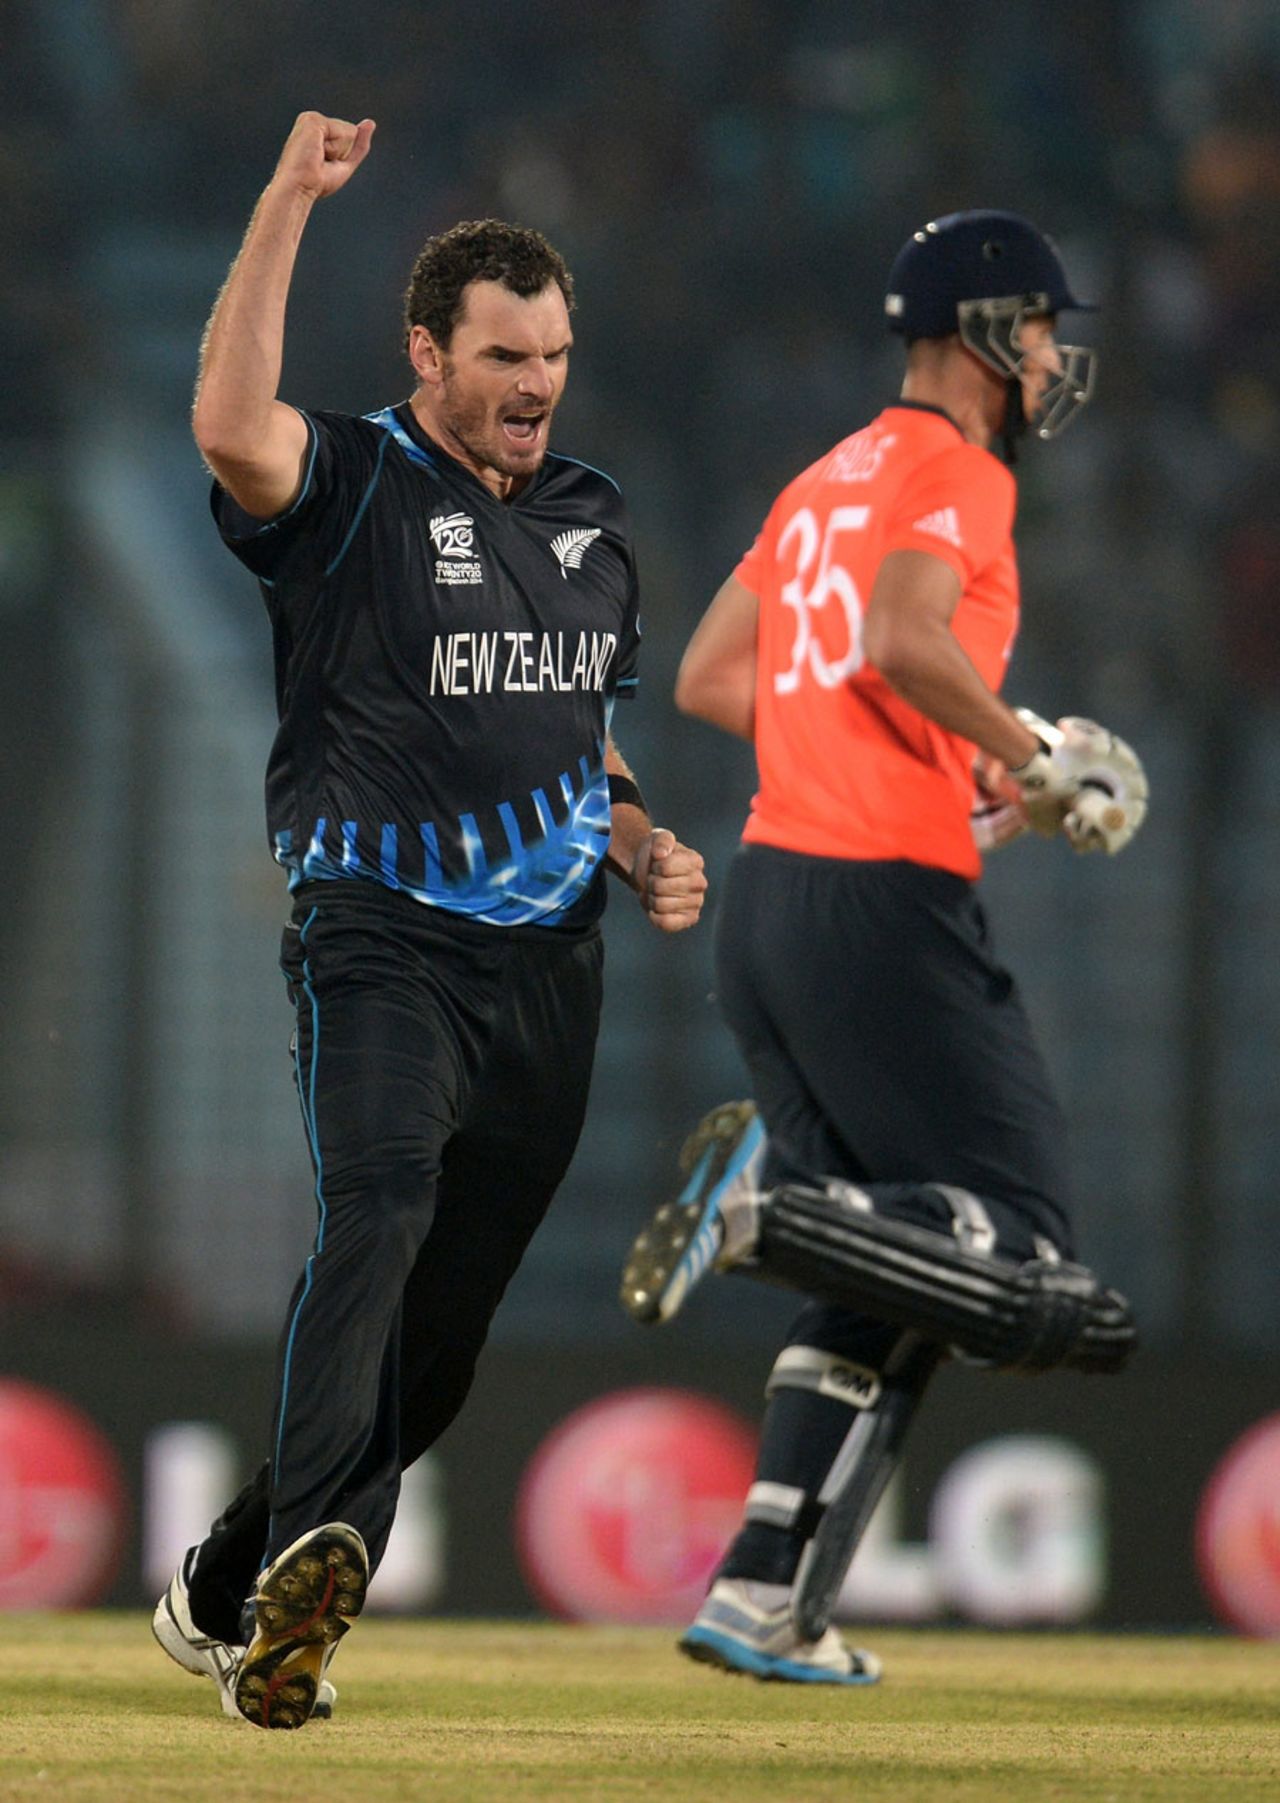 Kyle Mills dismissed Alex Hales in the first over, England v New Zealand, World T20, Group 1, Chittagong, March 22, 2014